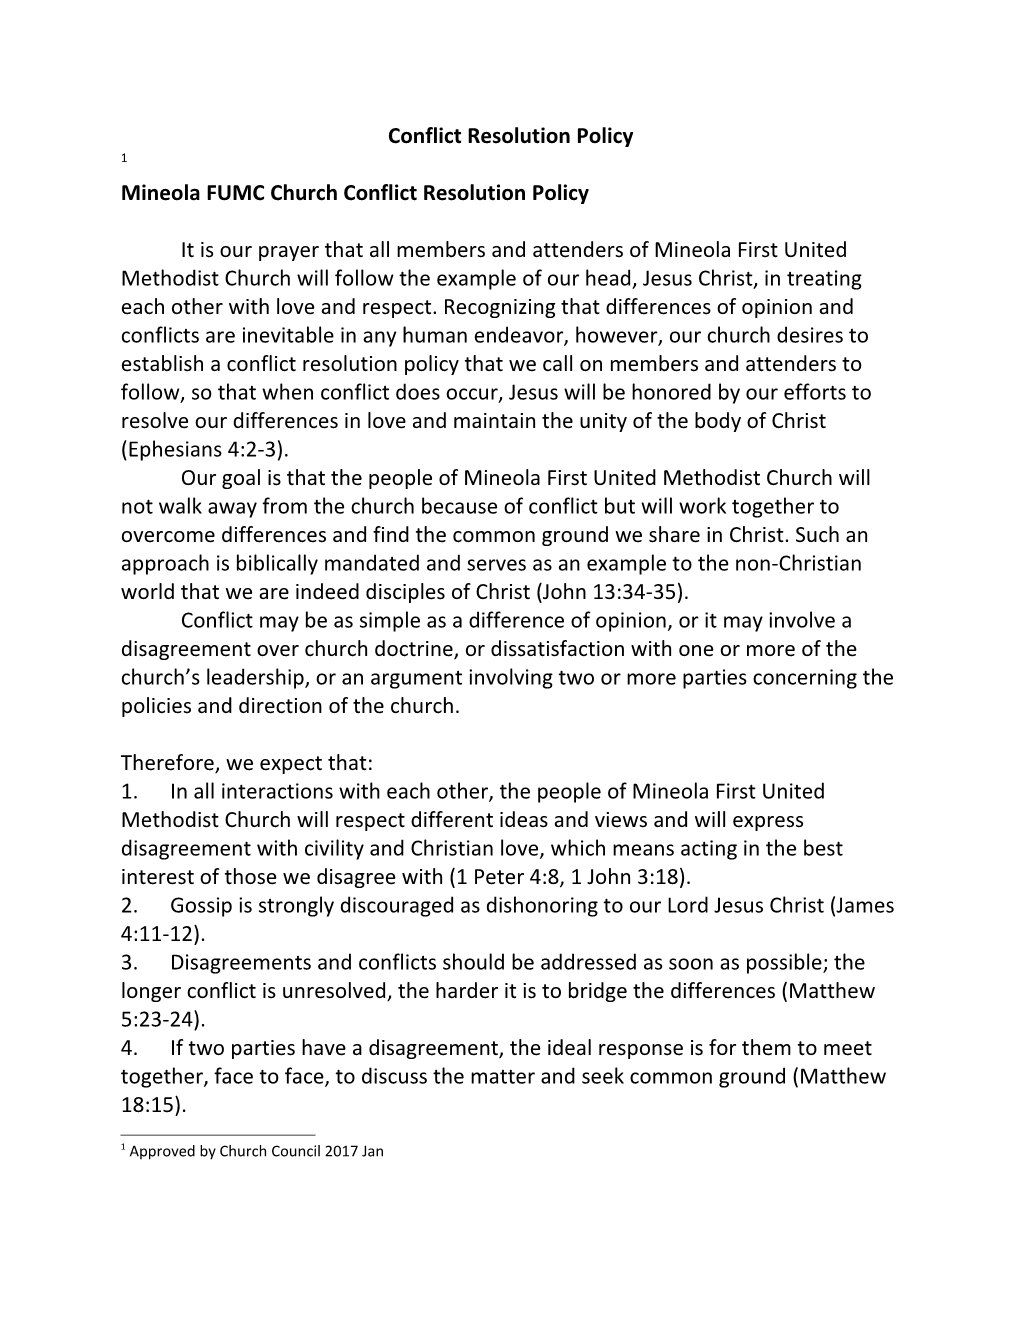 Mineola FUMC Church Conflict Resolution Policy